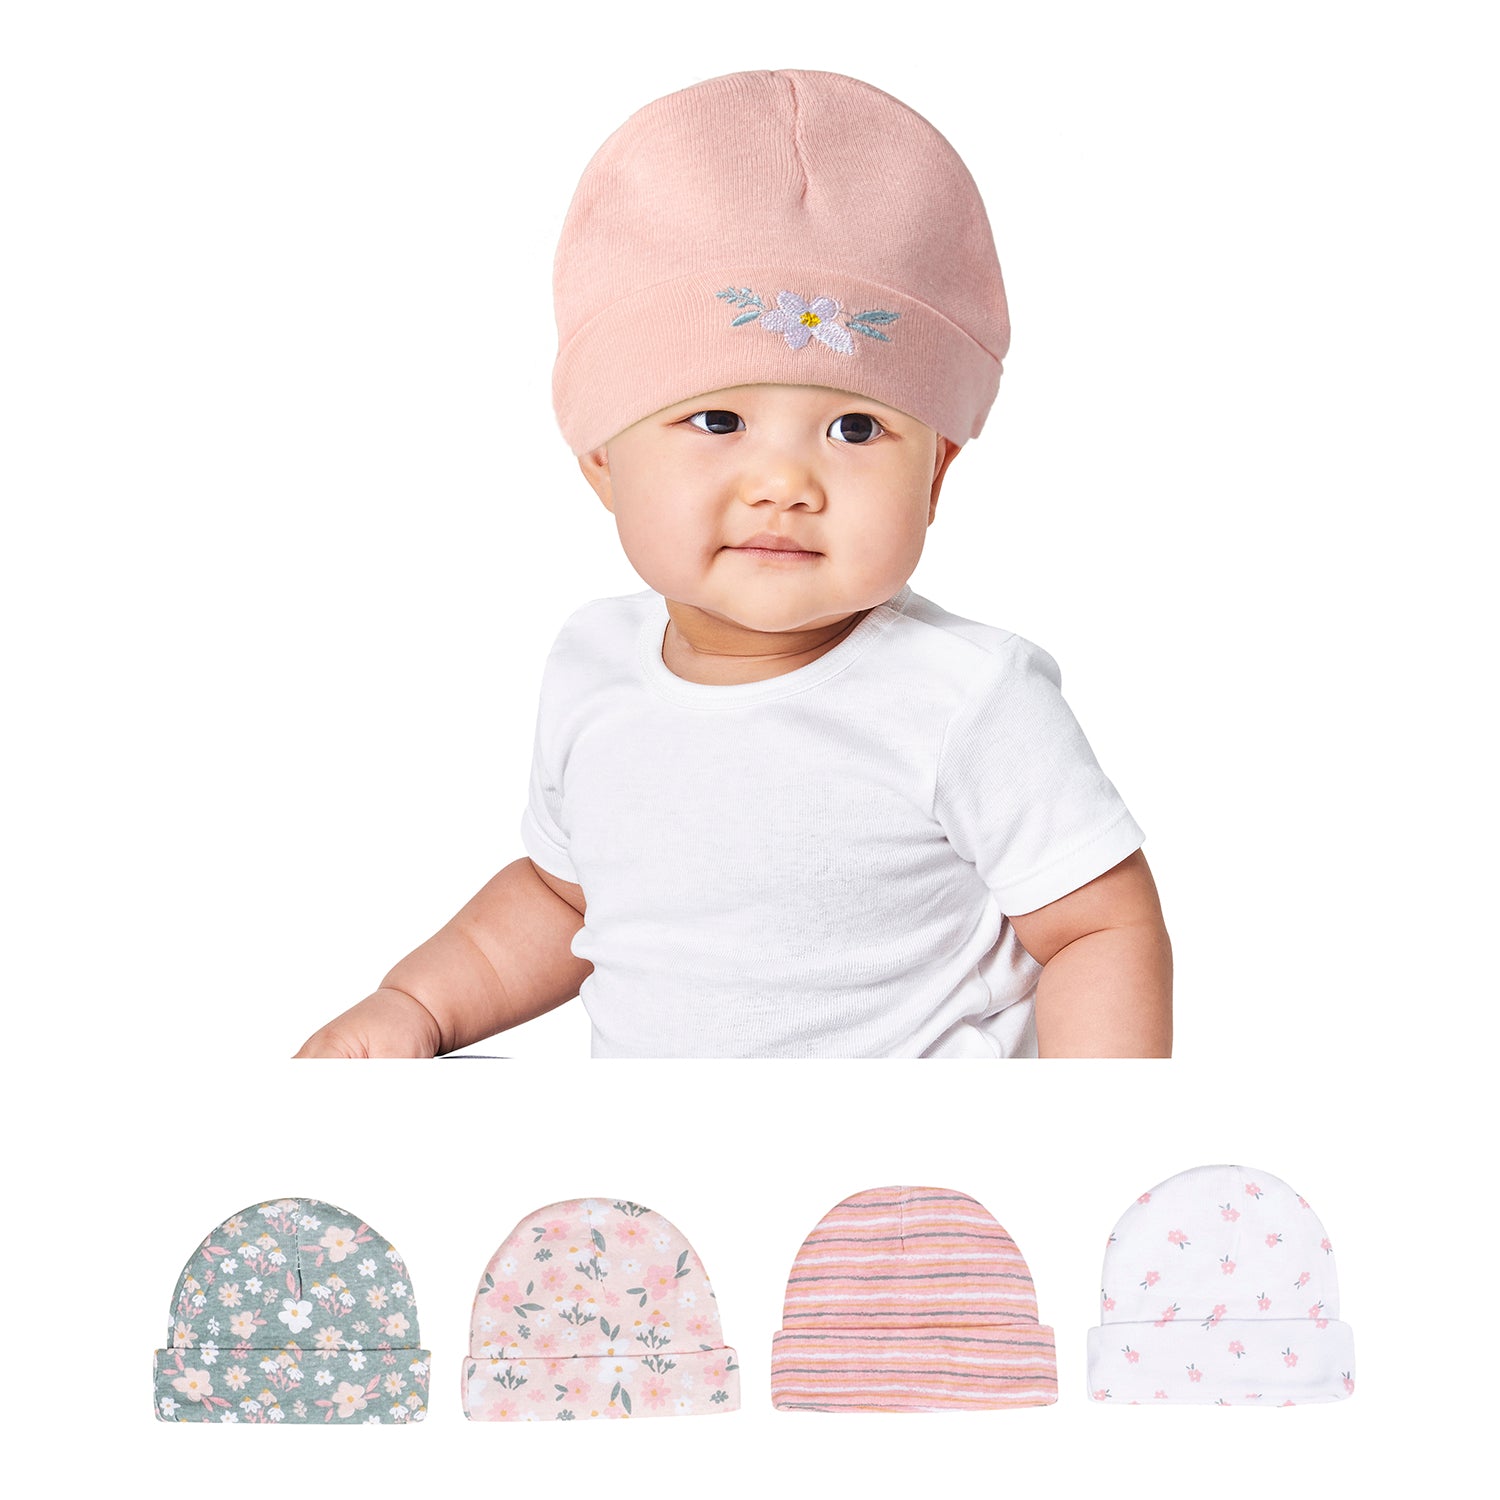 Baby Moo Floral Print Infants Ultra Soft 100% Cotton All Season Pack of 5 Caps - Pink